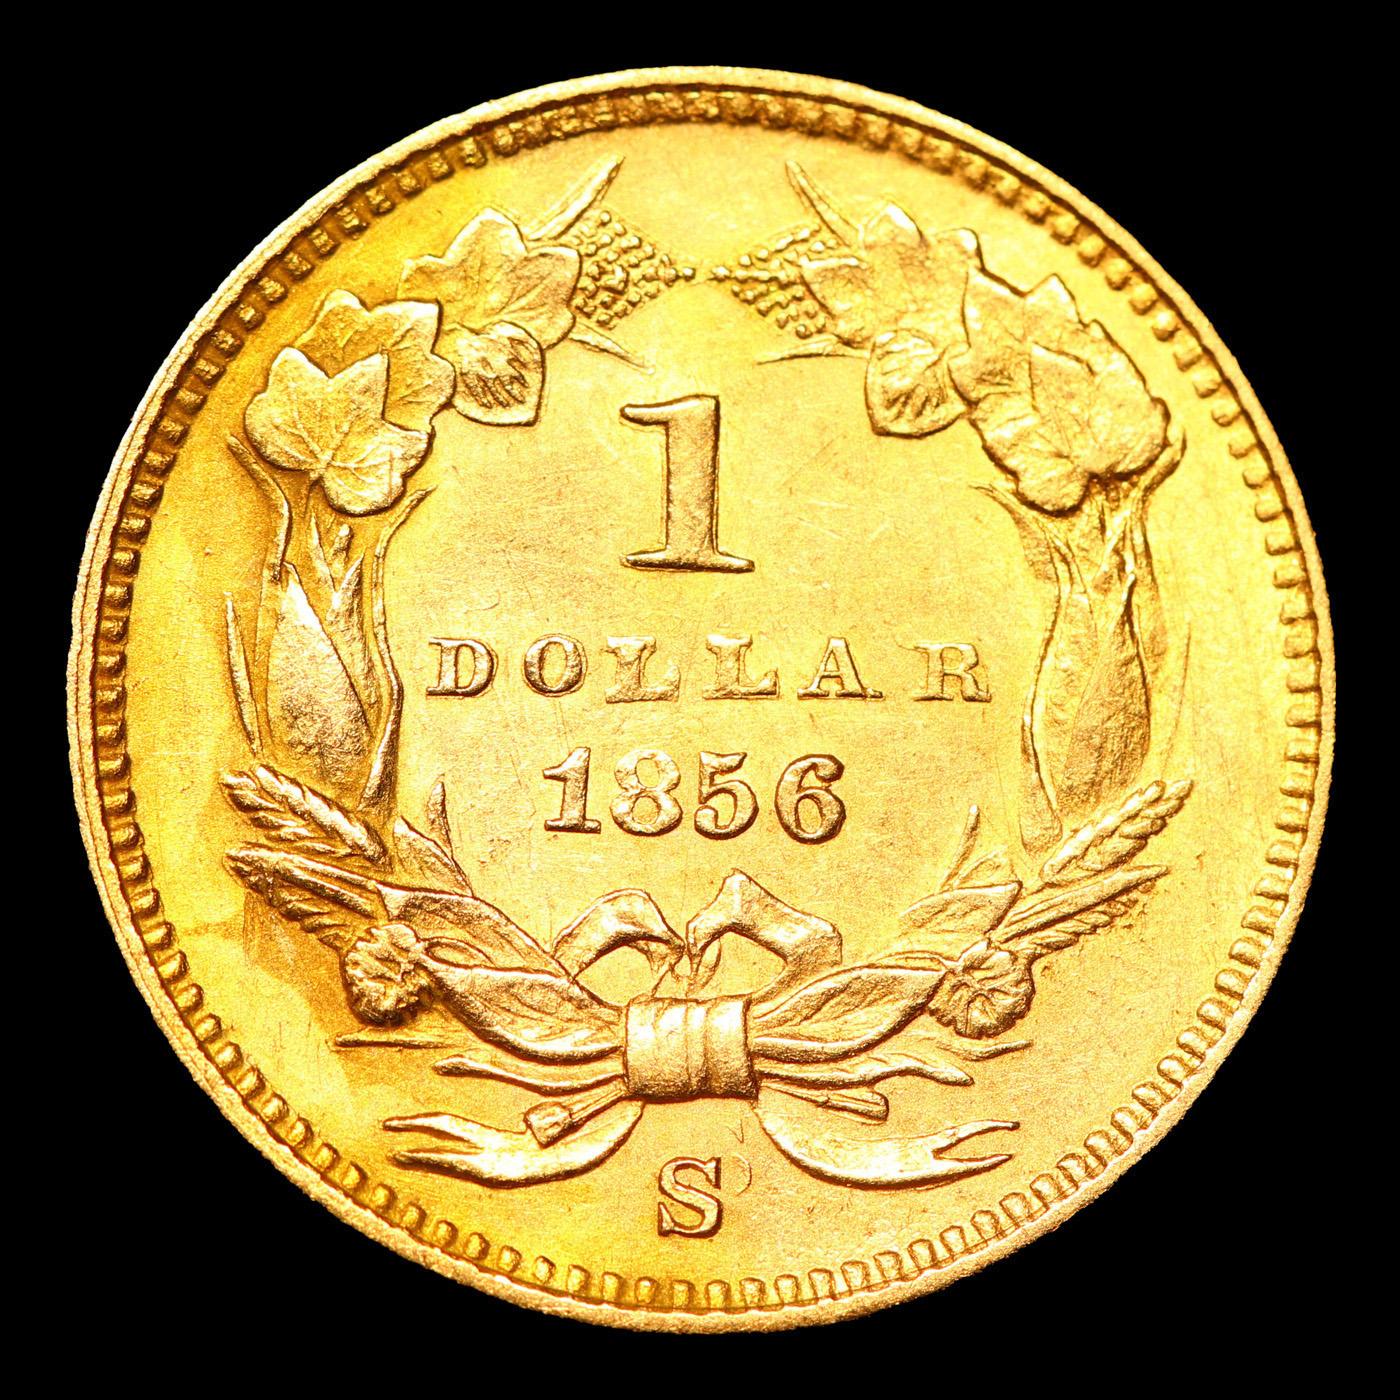 ***Auction Highlight*** 1856-s/s Gold Dollar TY-II FS-501 $1 Graded ms63 details By SEGS (fc)